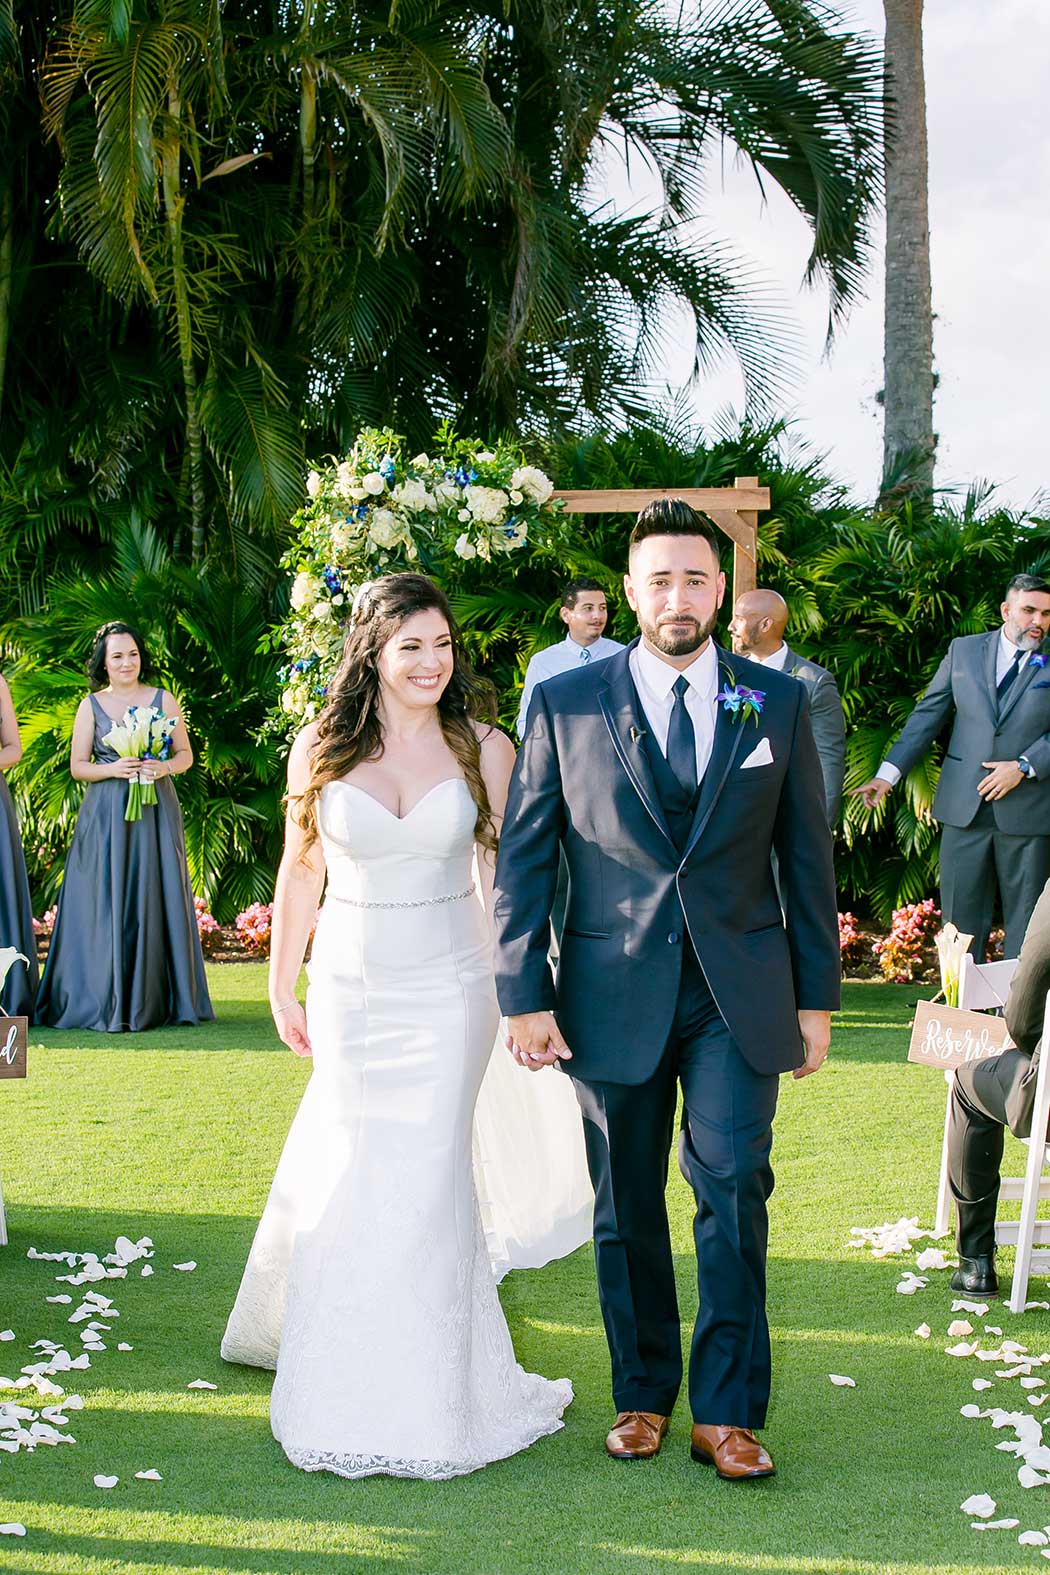 modern wedding at breakers west country club palm beach | bride and groom walk down aisle